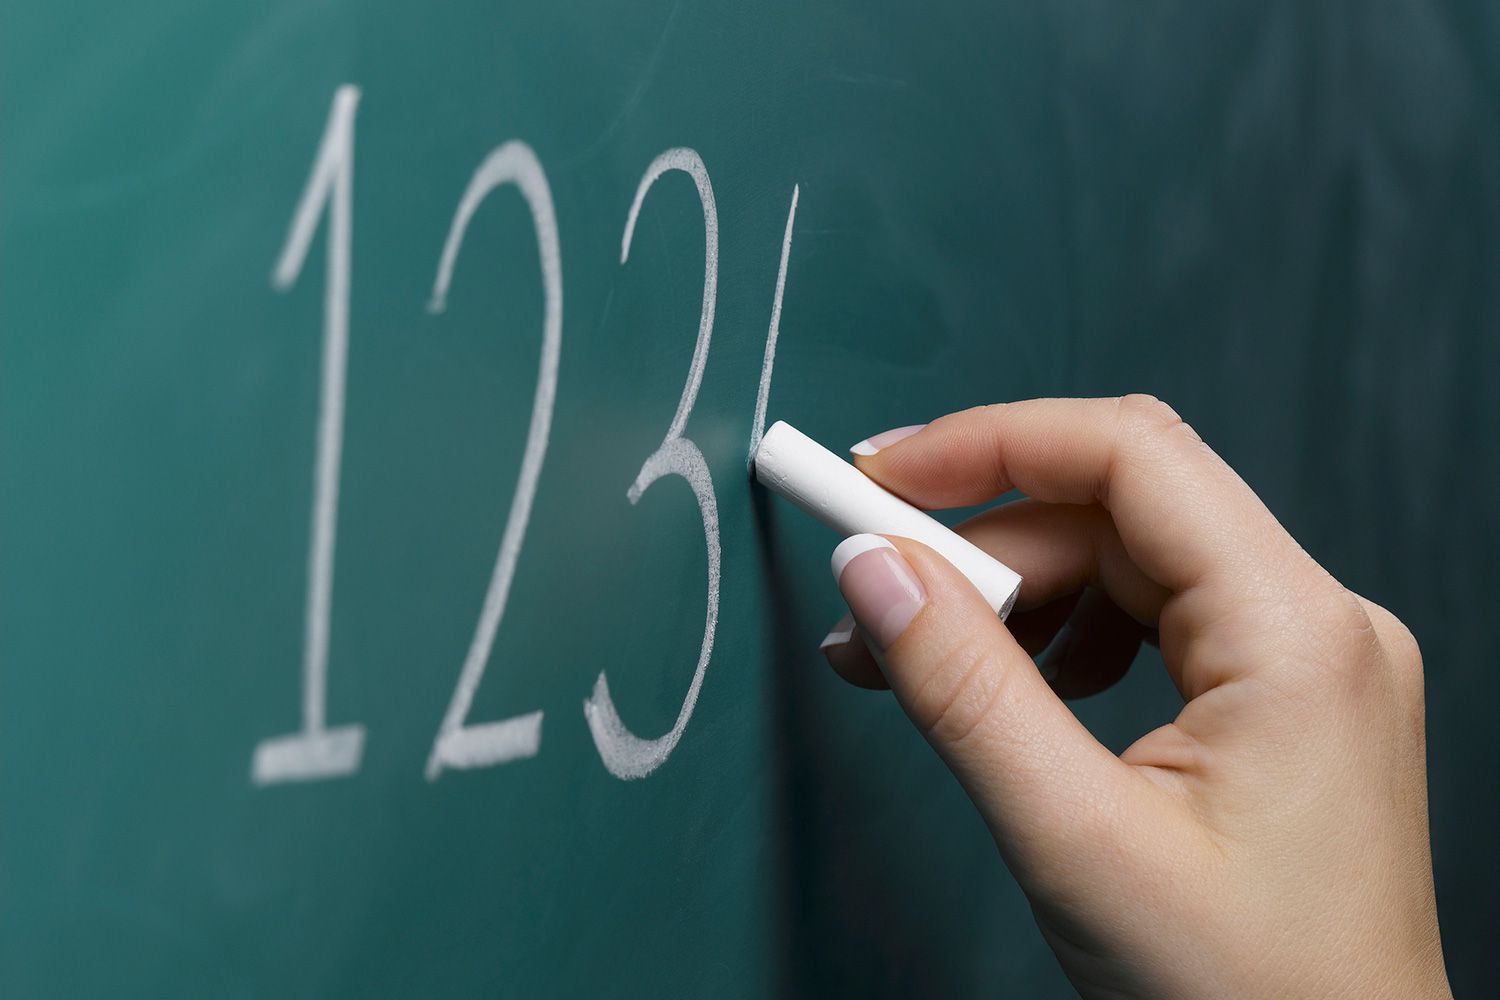 These Trick Questions Will Stump You Unless You’re Really, REALLY Intelligent Teaching Numbers